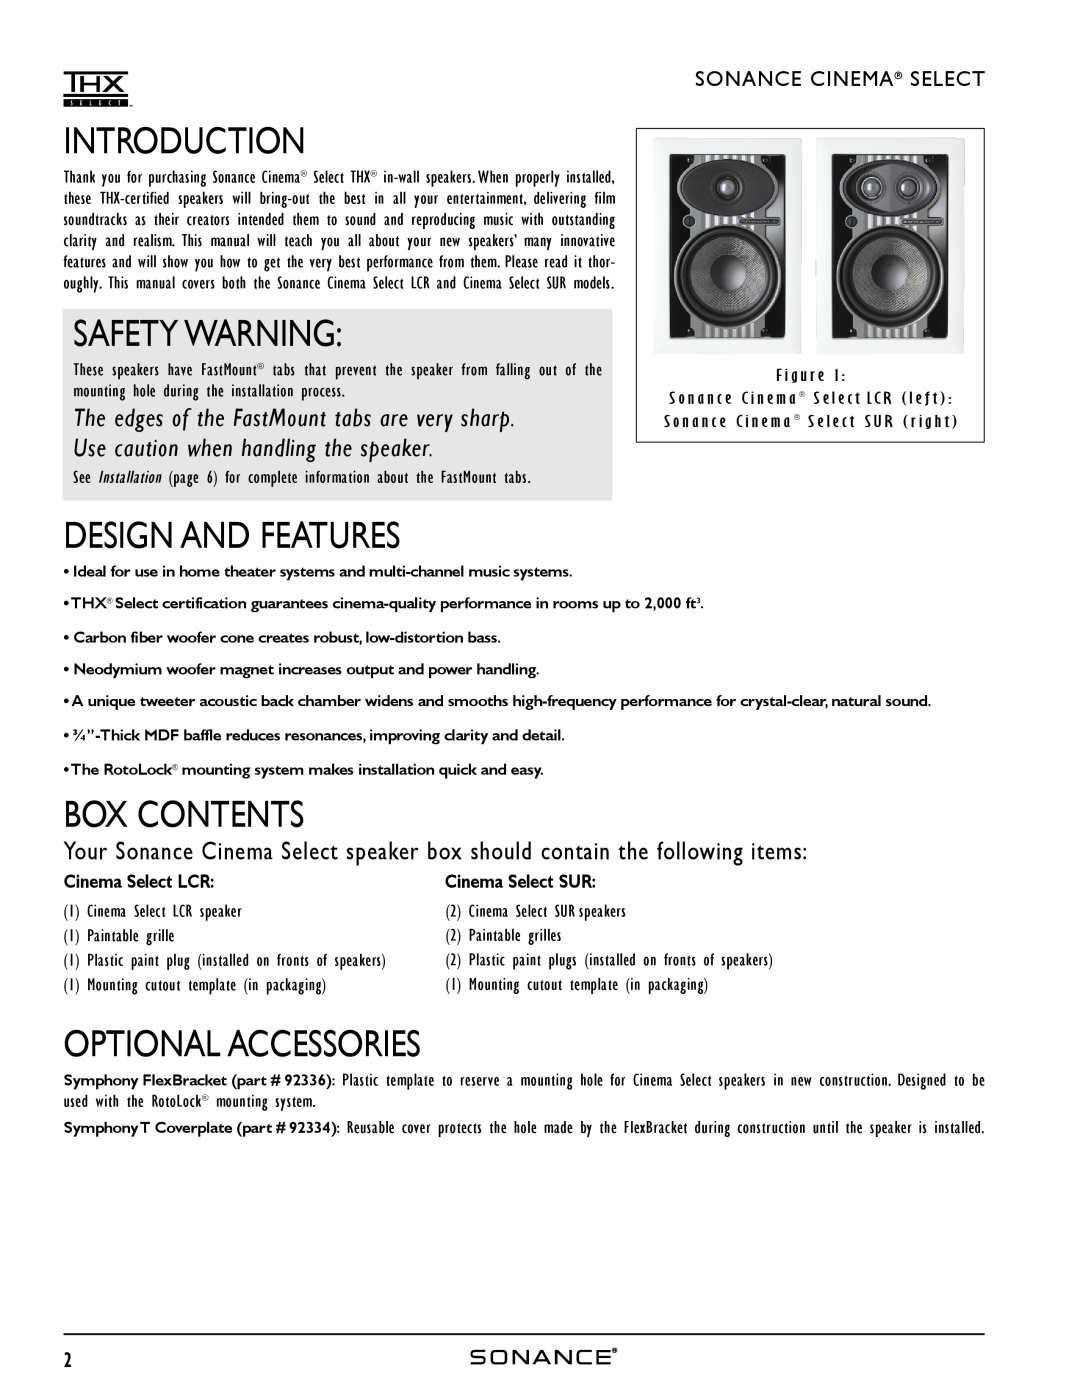 Sonance HOME THEATER SPEAKERS Introduction, Safety Warning, Design And Features, Box Contents, Optional Accessories 